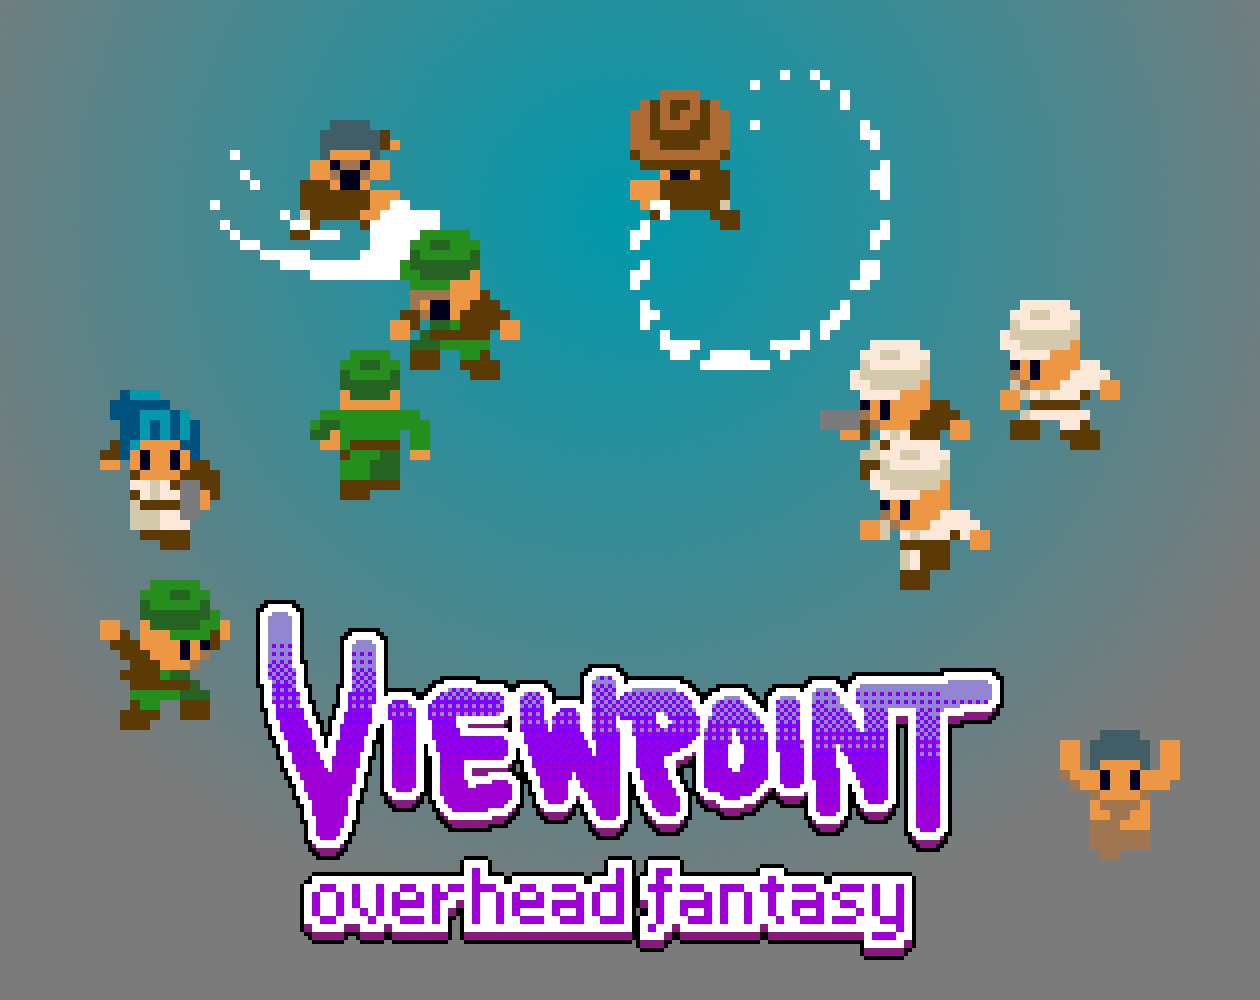 VIEWPOINT Overhead Fantasy Archaeologist